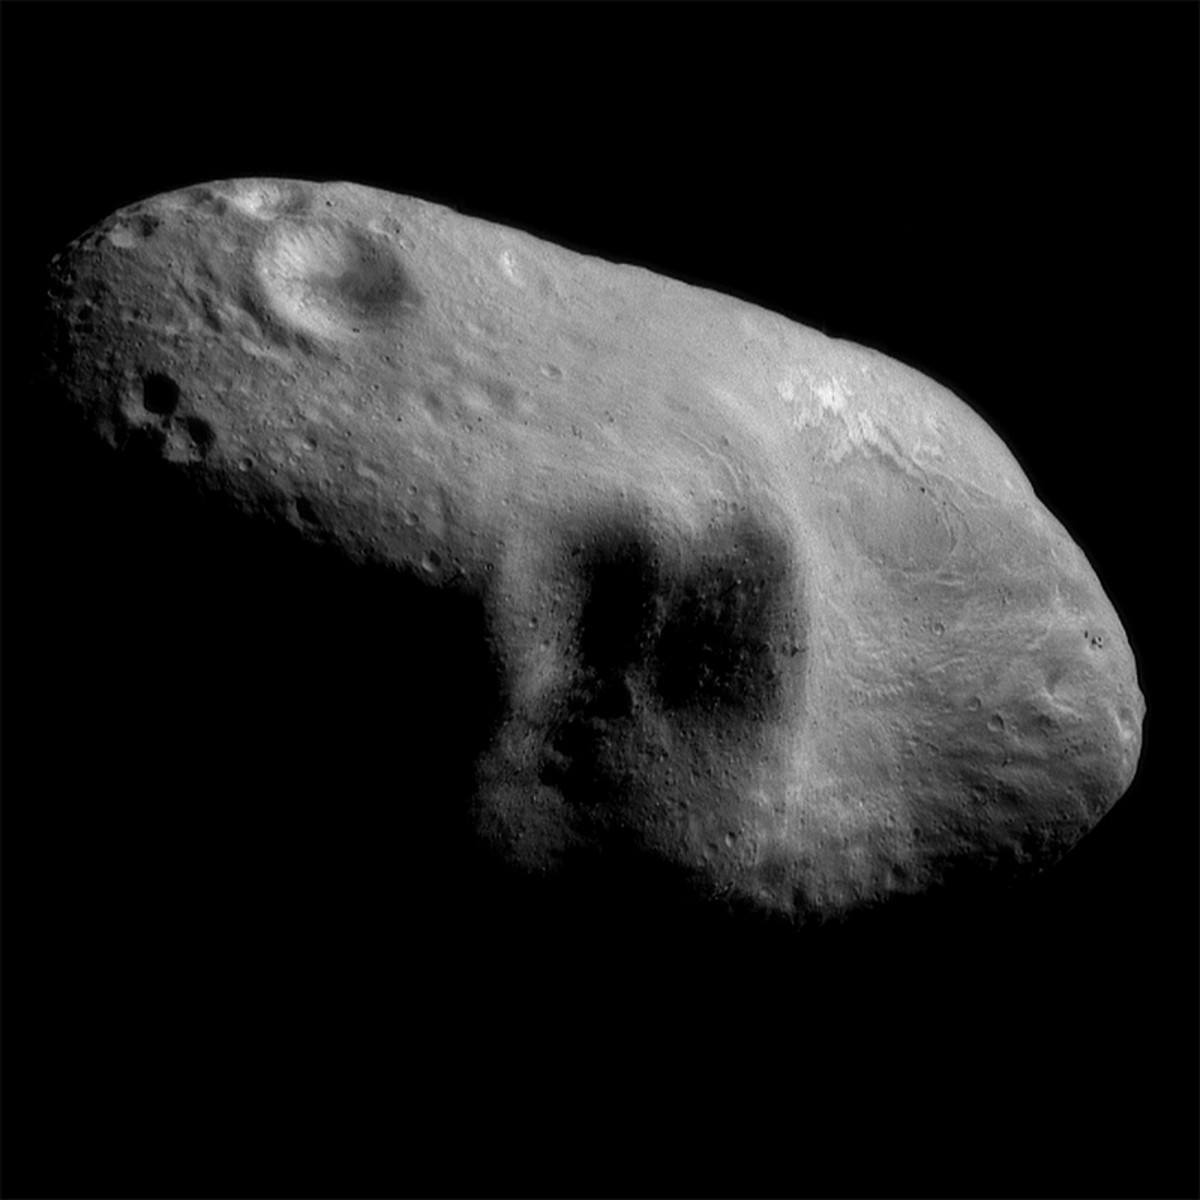 An image mosaic of the asteroid Eros taken by the robotic NEAR Shoemaker space probe on March 3rd, 2000, from a distance of 127 miles.